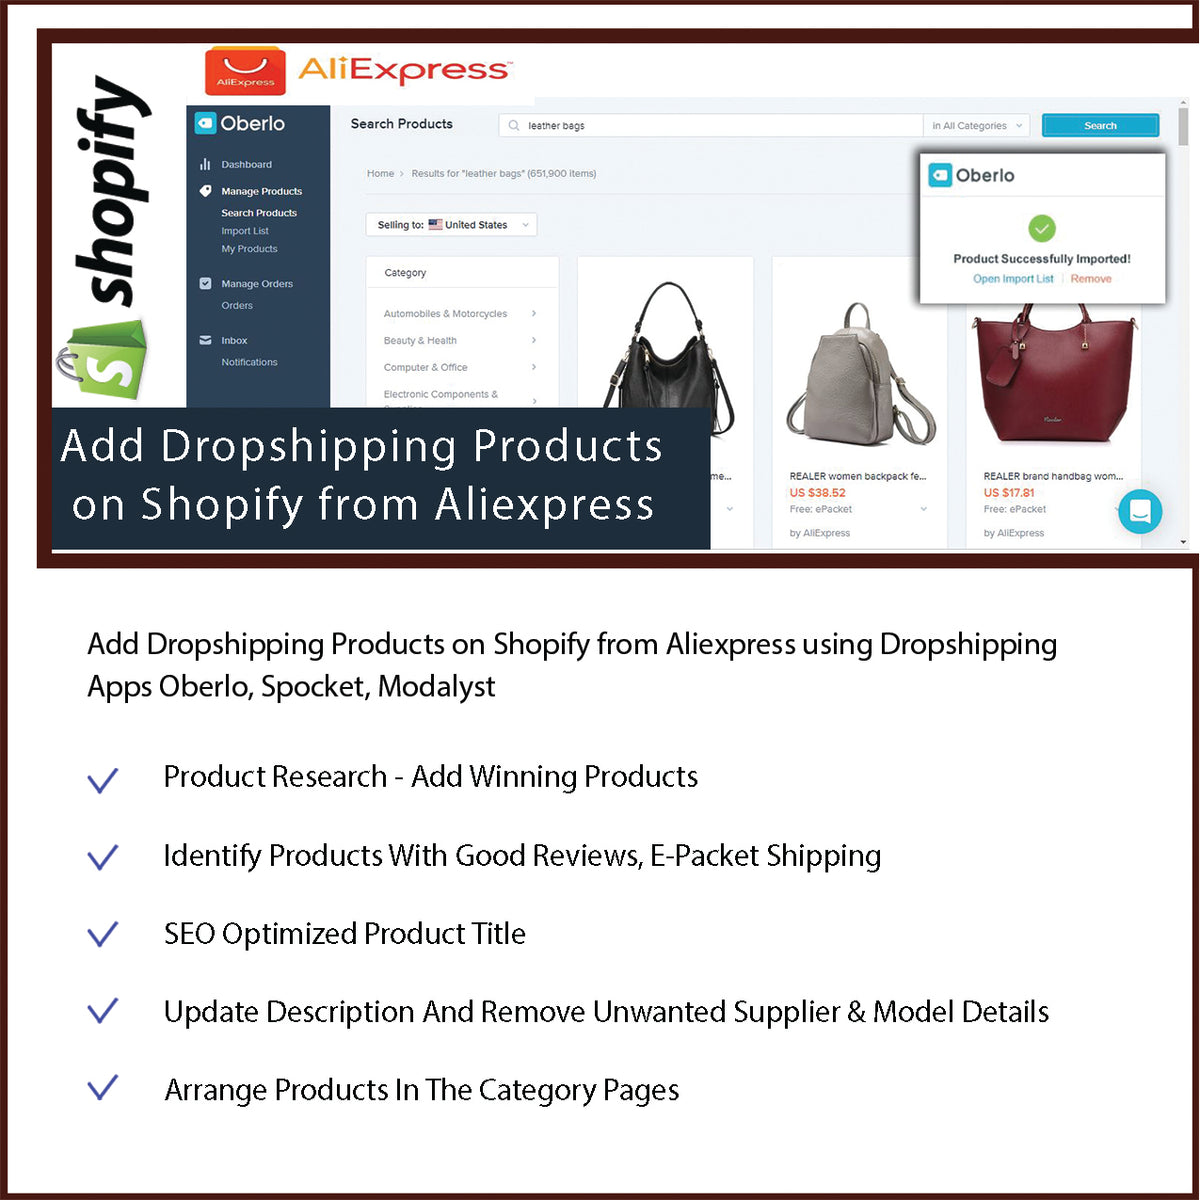 Add Dropshipping Products On Shopify From Aliexpress